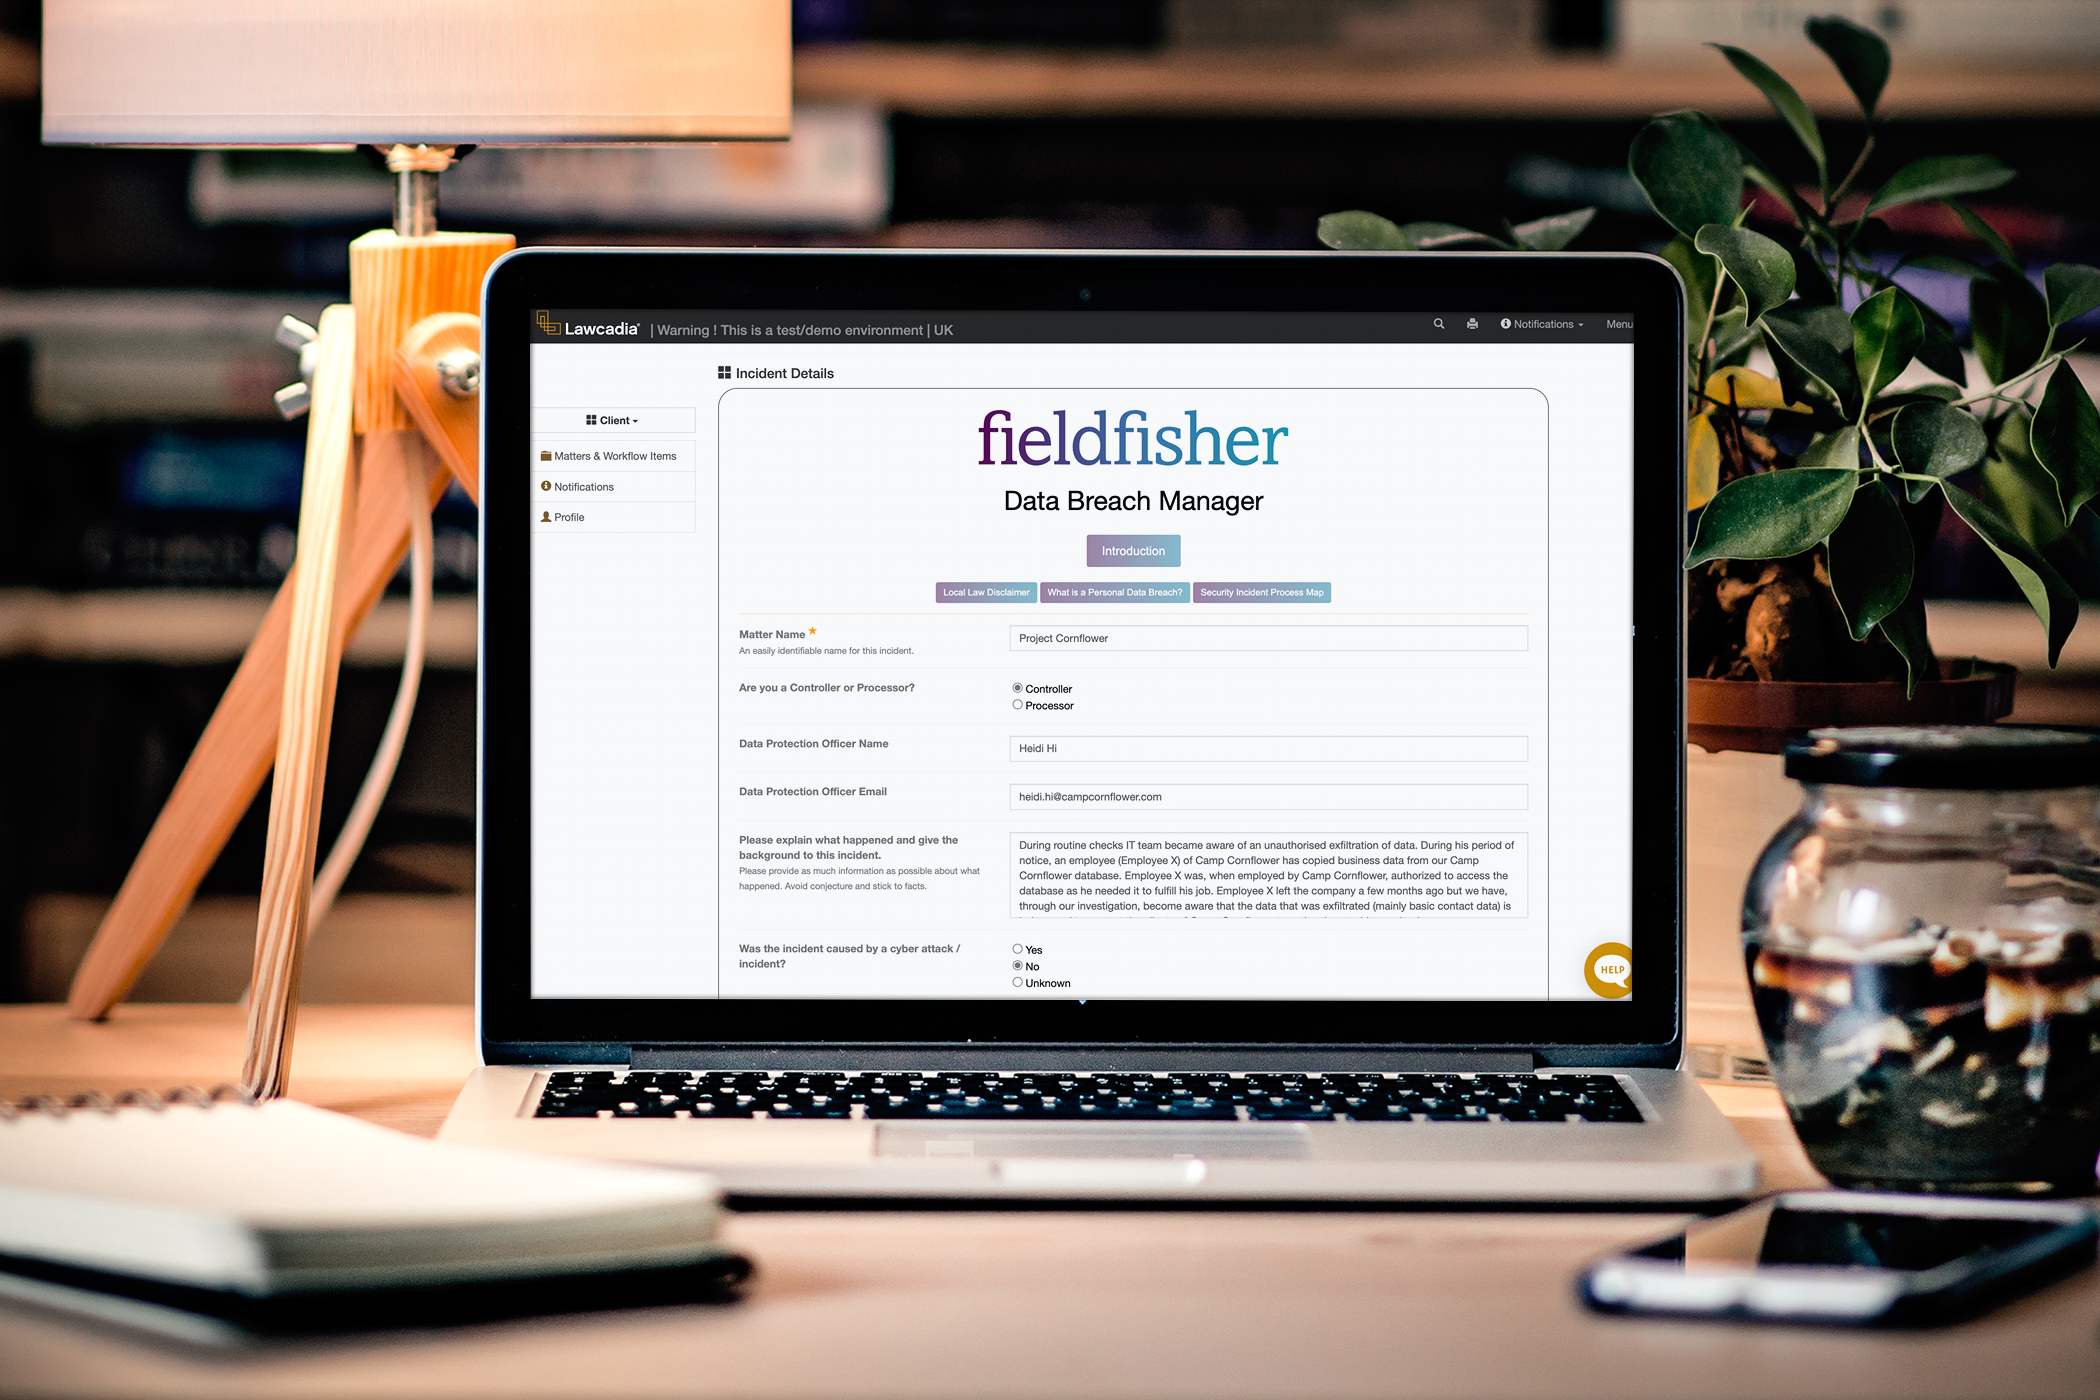 Fieldfisher partners with Australian legal tech firm to launch revolutionary data breach manager